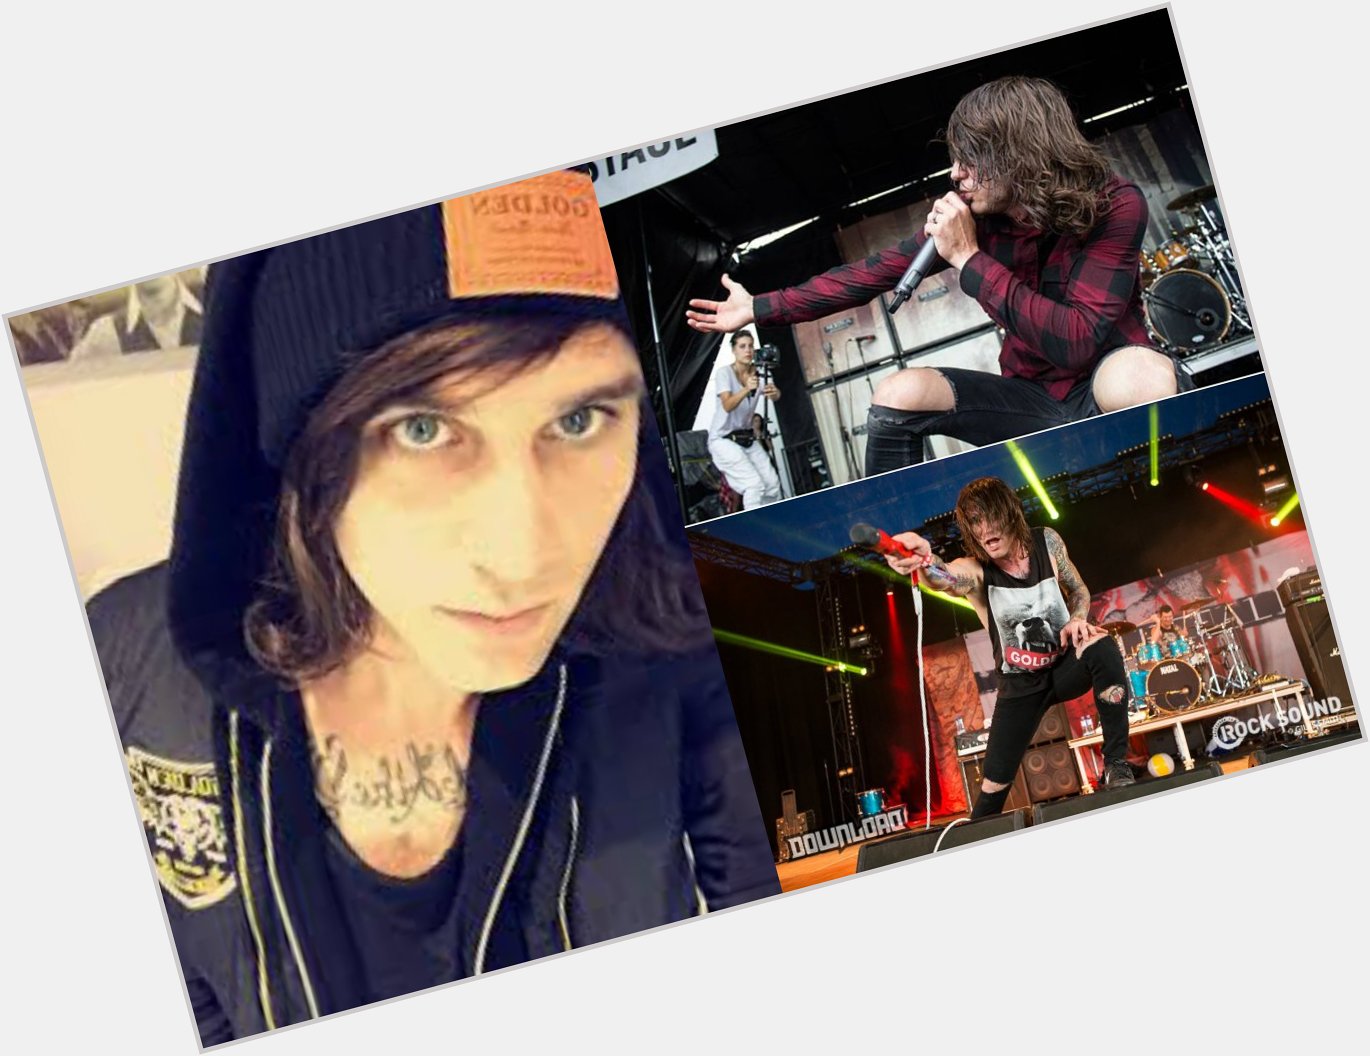 Happy birthday to one of my favourite vocalists and inspirations Beau Bokan  Mexico Awaits With Much Emotion 